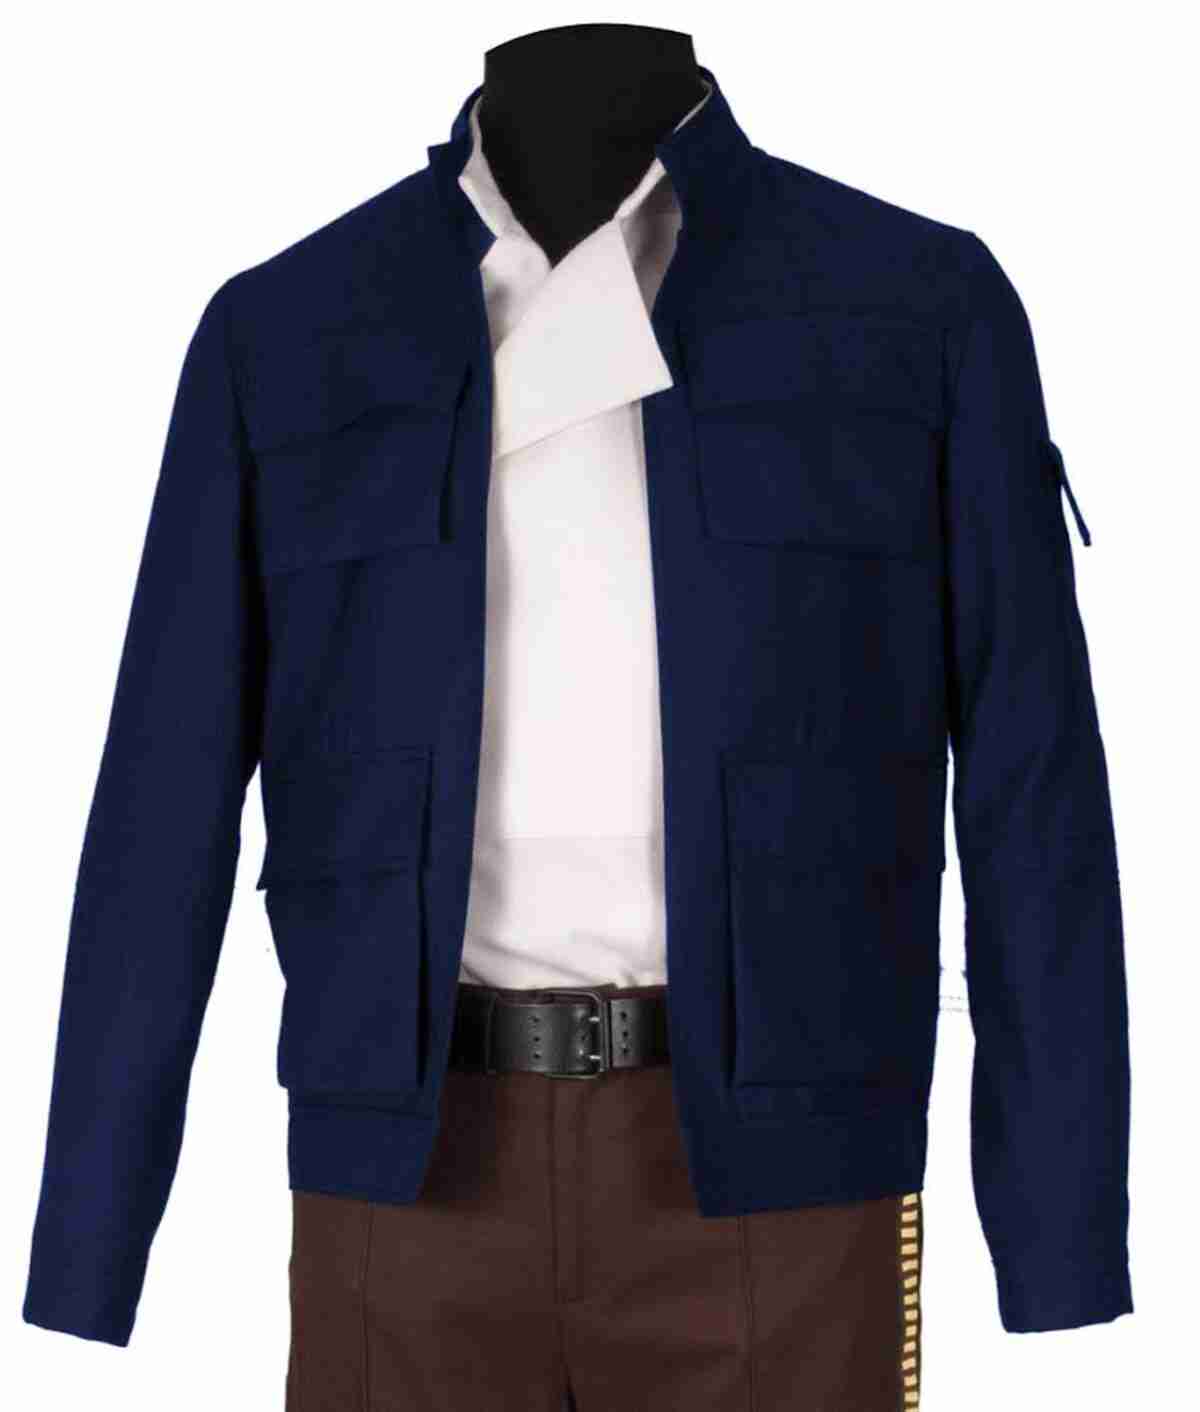 Back Bespin Han Solo Blue Jacket